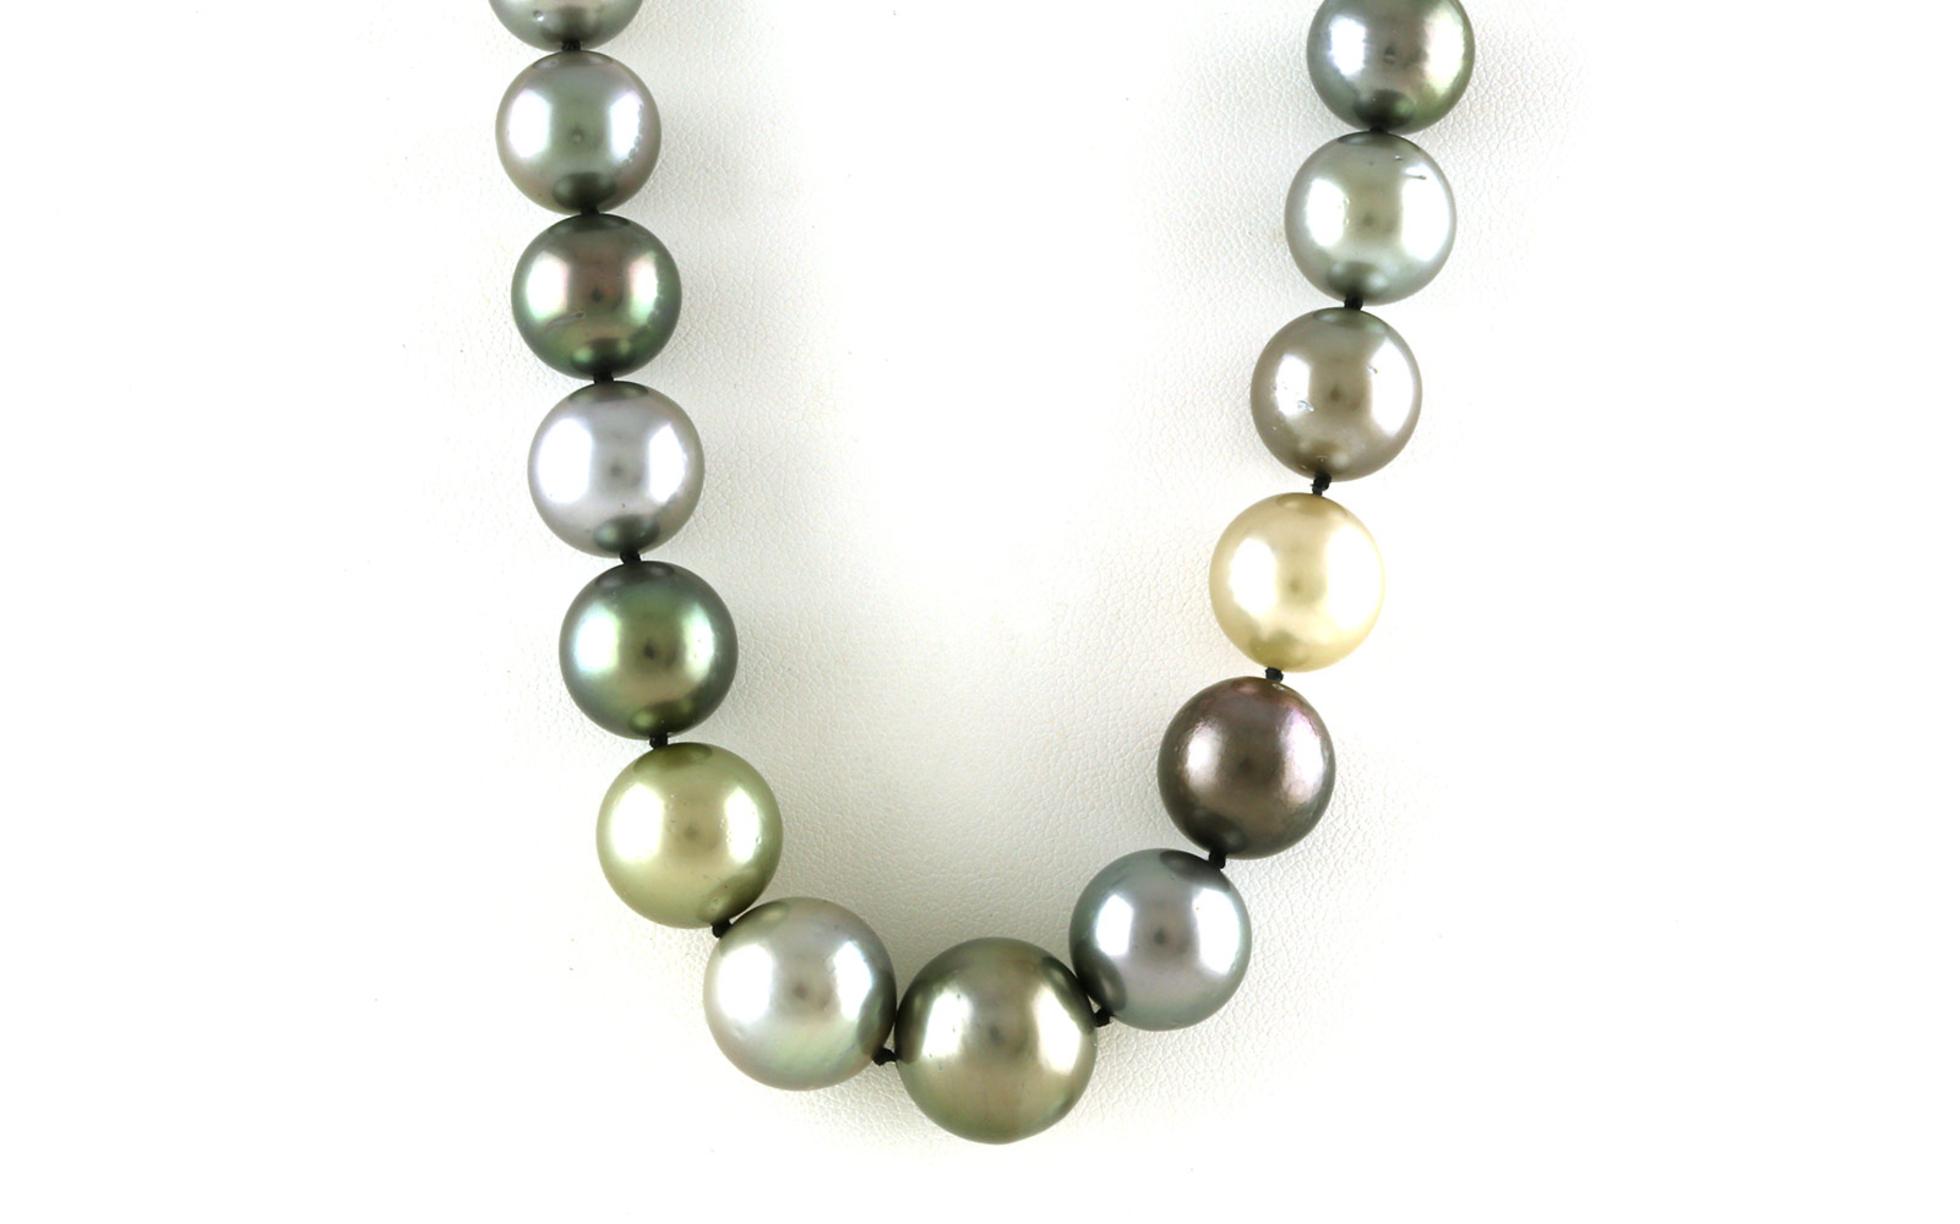 Graduated Multi-tone Tahitian Pearl Necklace with White Gold Clasp